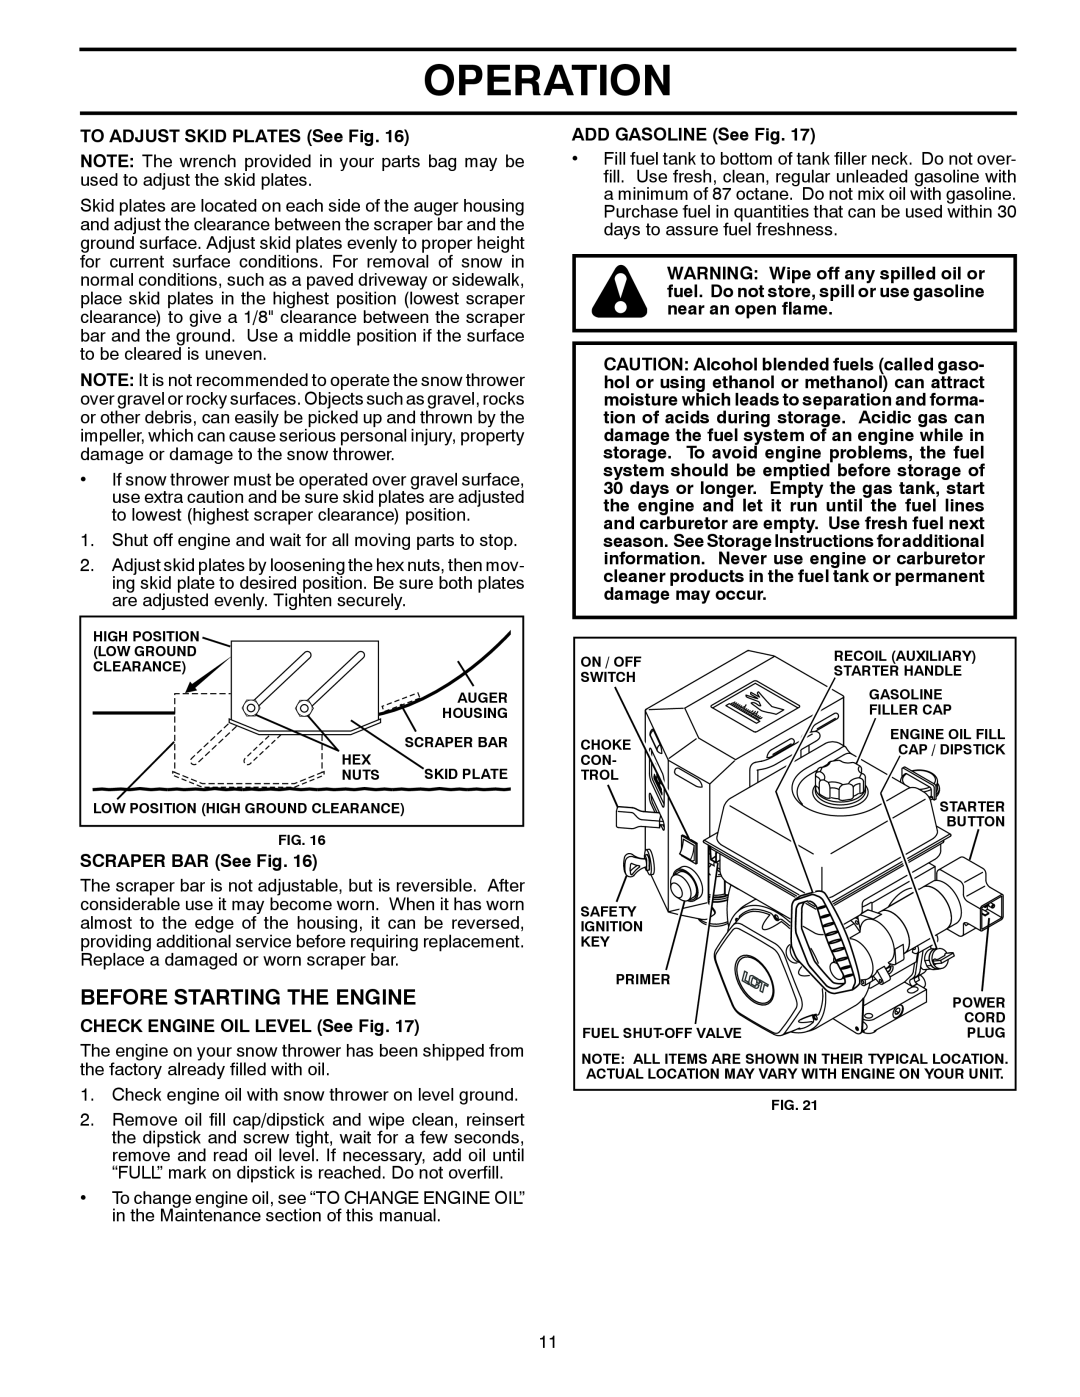 McCulloch MC627ES, 96192004100 Before Starting The Engine, Operation, TO ADJUST SKID PLATES See Fig, SCRAPER BAR See Fig 